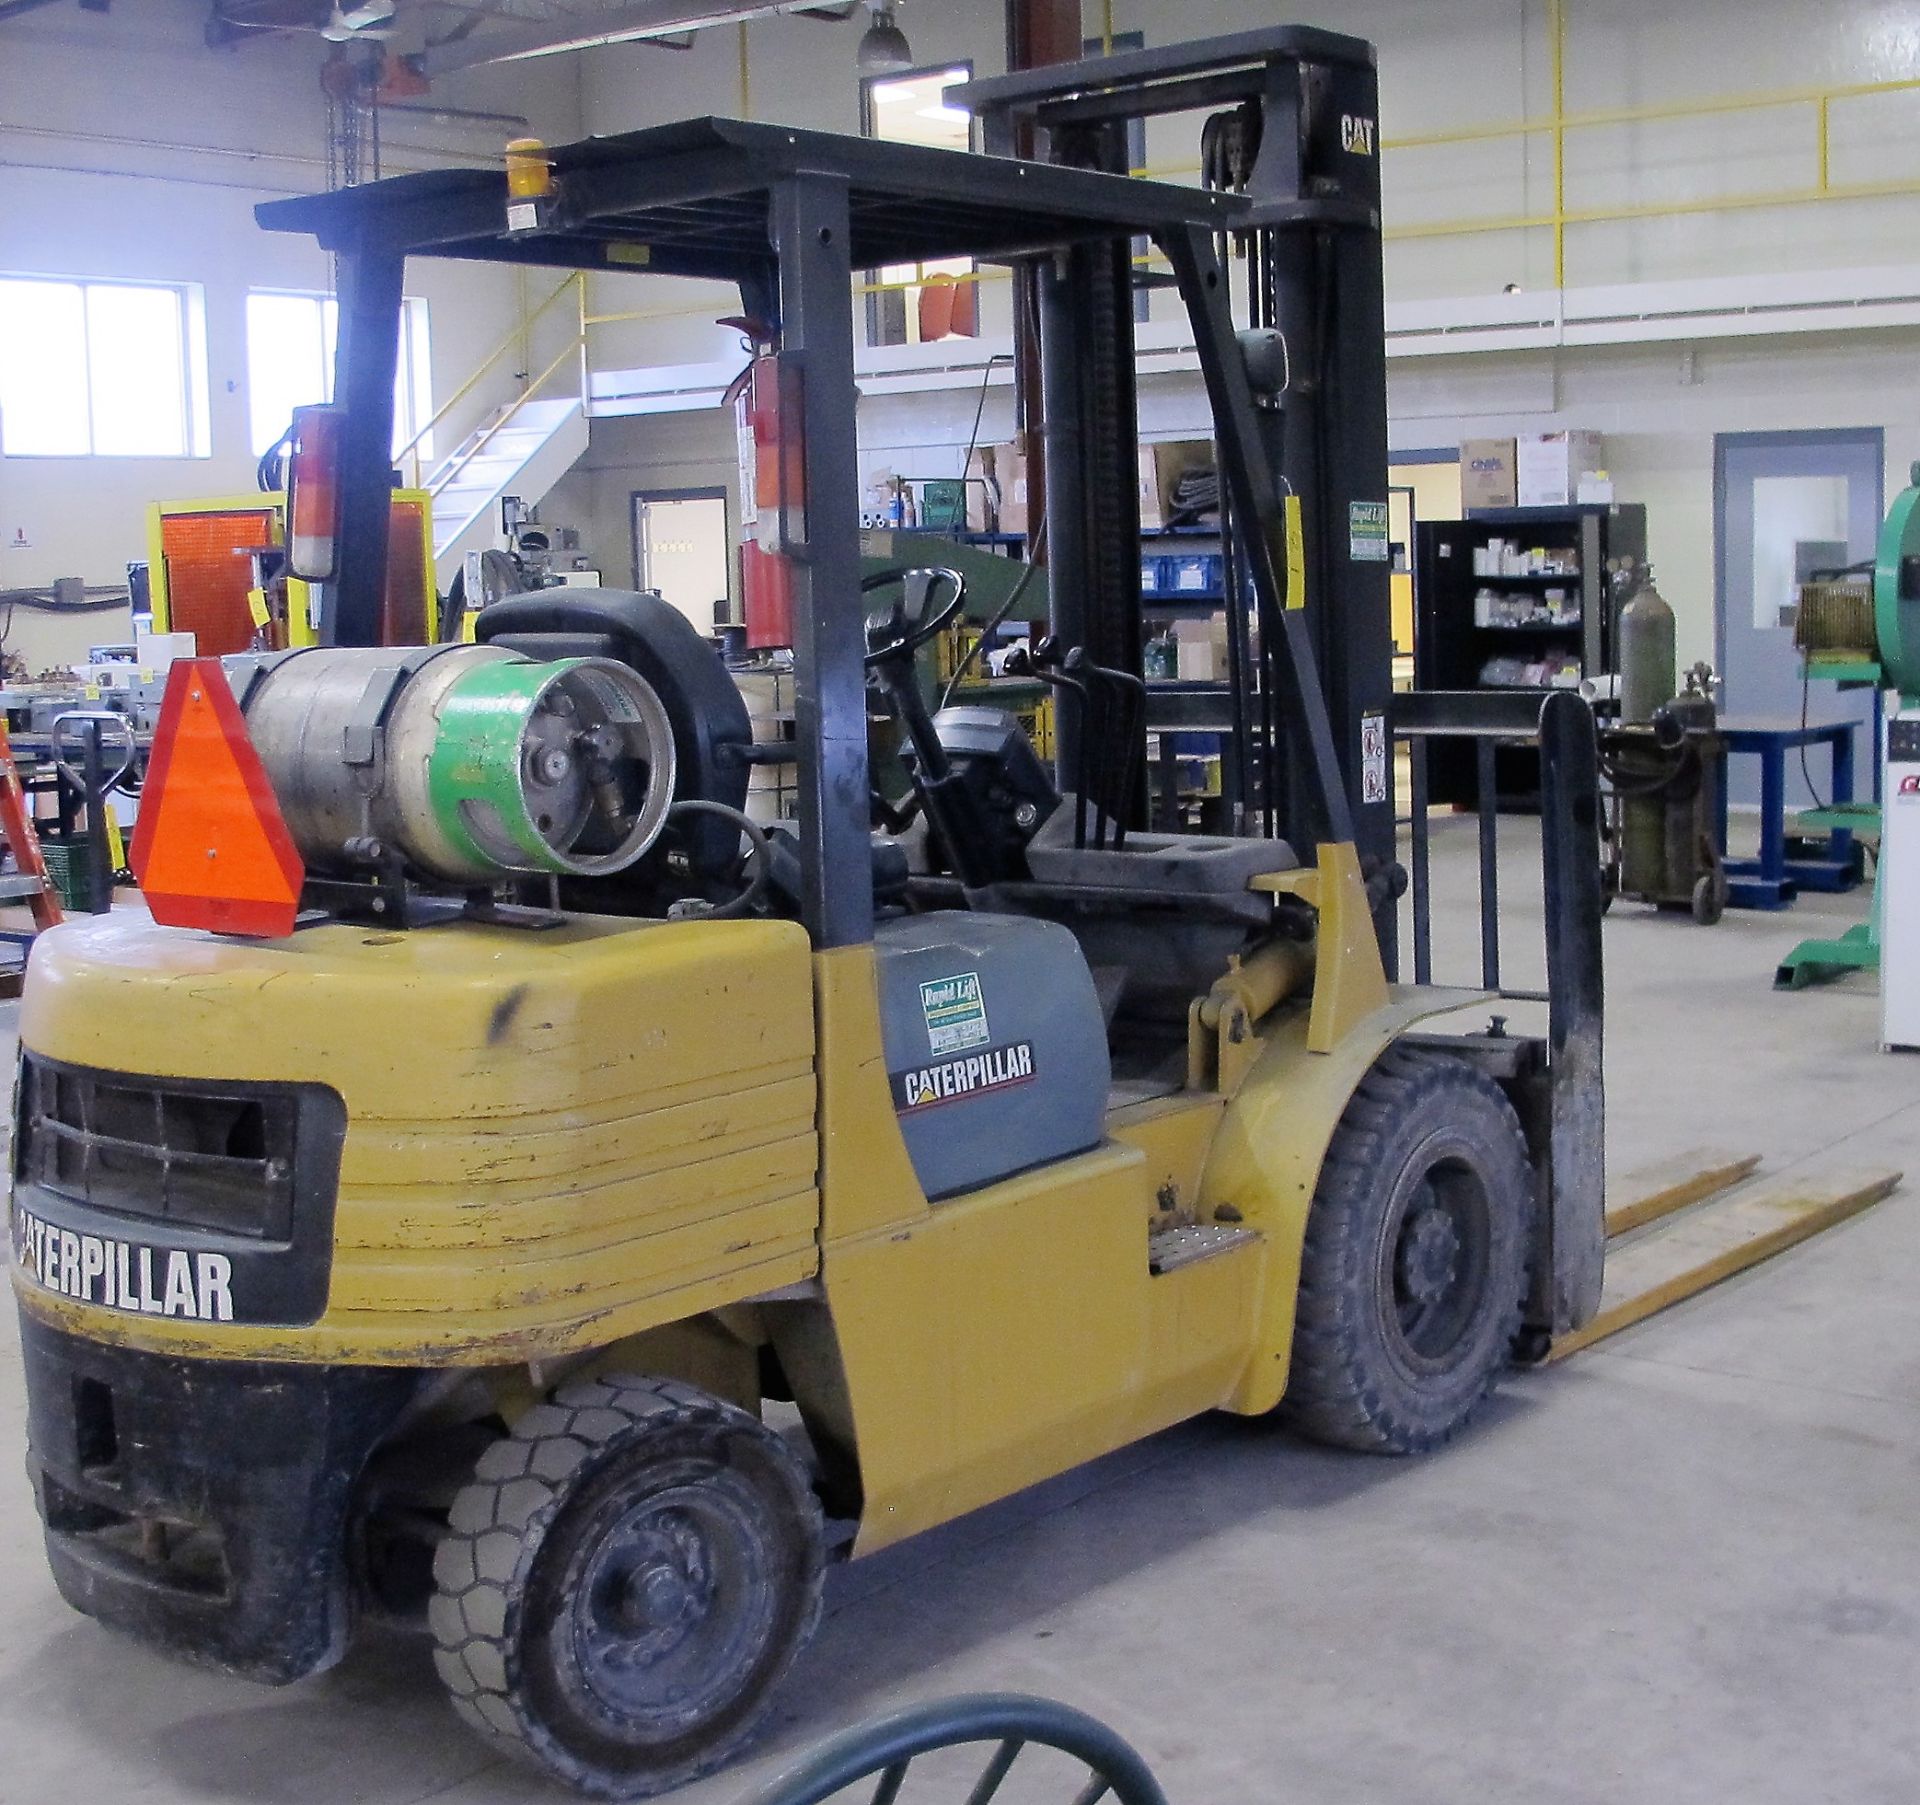 CATERPILLAR GP30 PROPANE FORKLIFT, 6,000LB CAPACITY, S/N 7AM01675, 146" MAX LIFT, 2-STAGE MAST, SIDE - Image 3 of 6